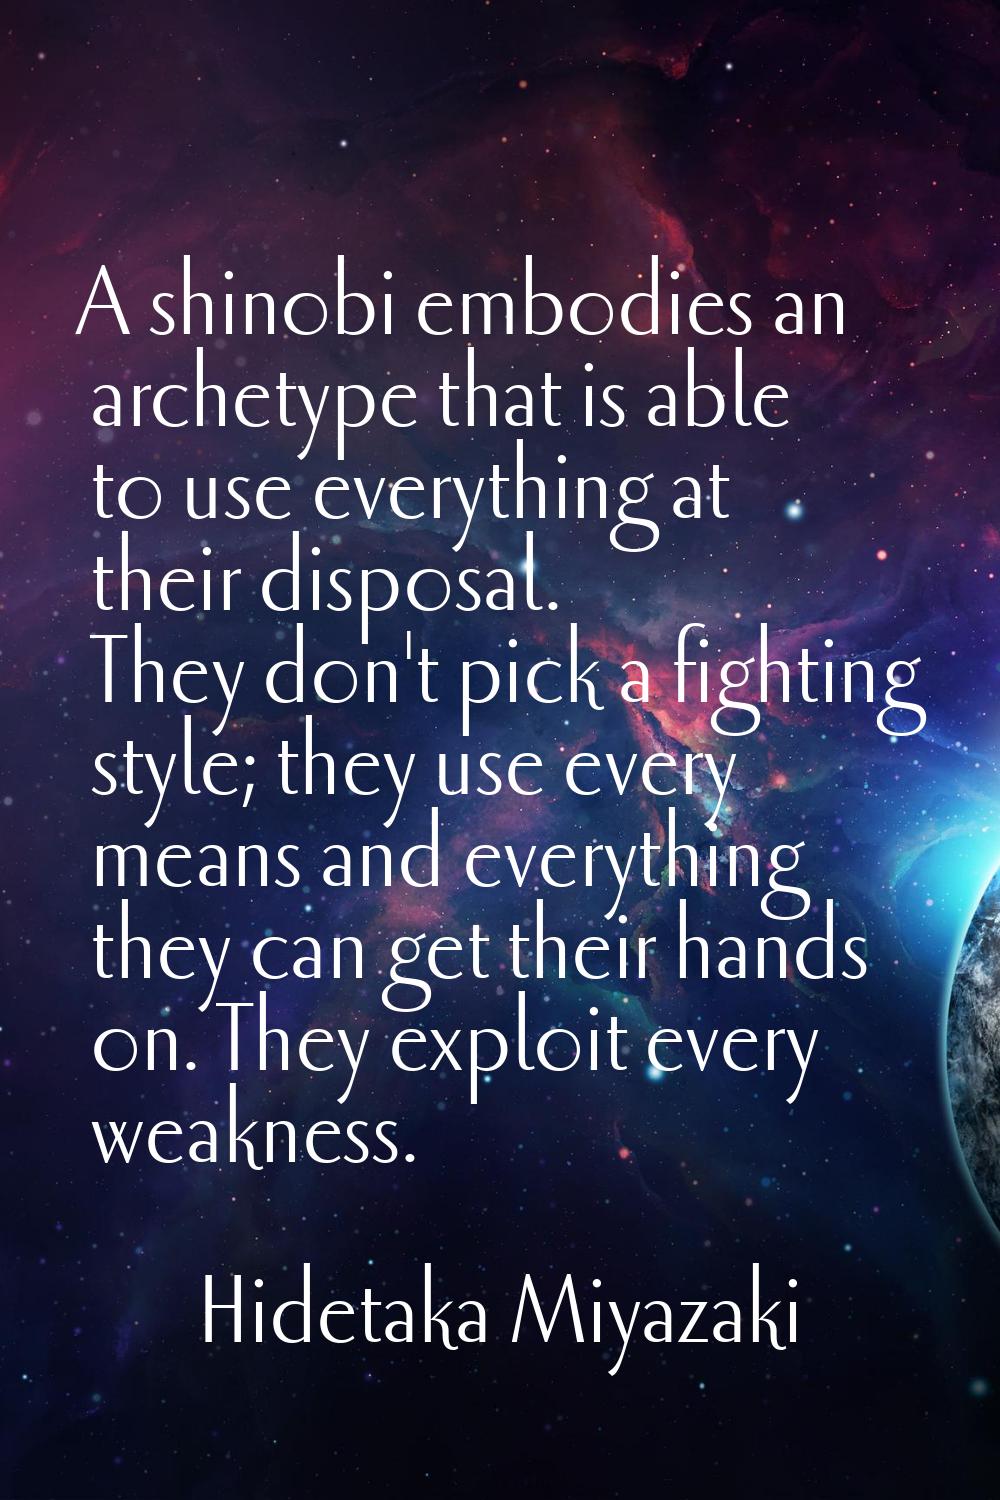 A shinobi embodies an archetype that is able to use everything at their disposal. They don't pick a